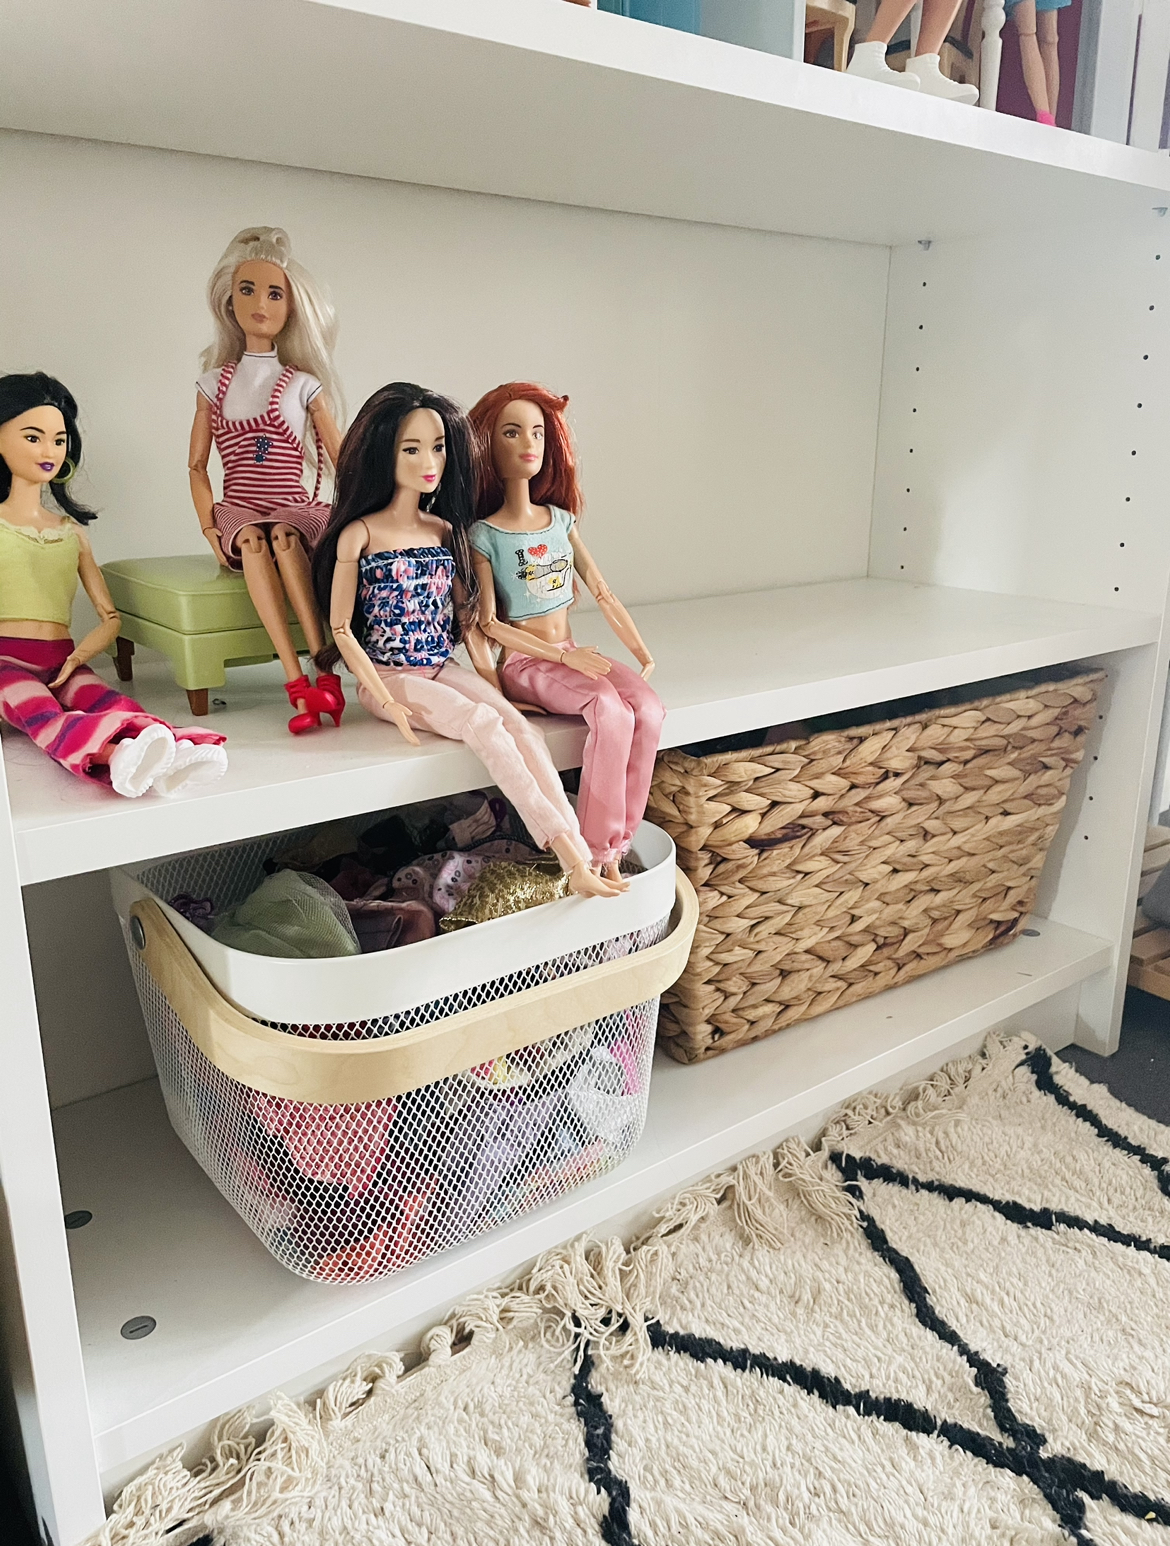 My Barbie Collection Display and Storage 2021 – Barbie Girl's Dreamhouse